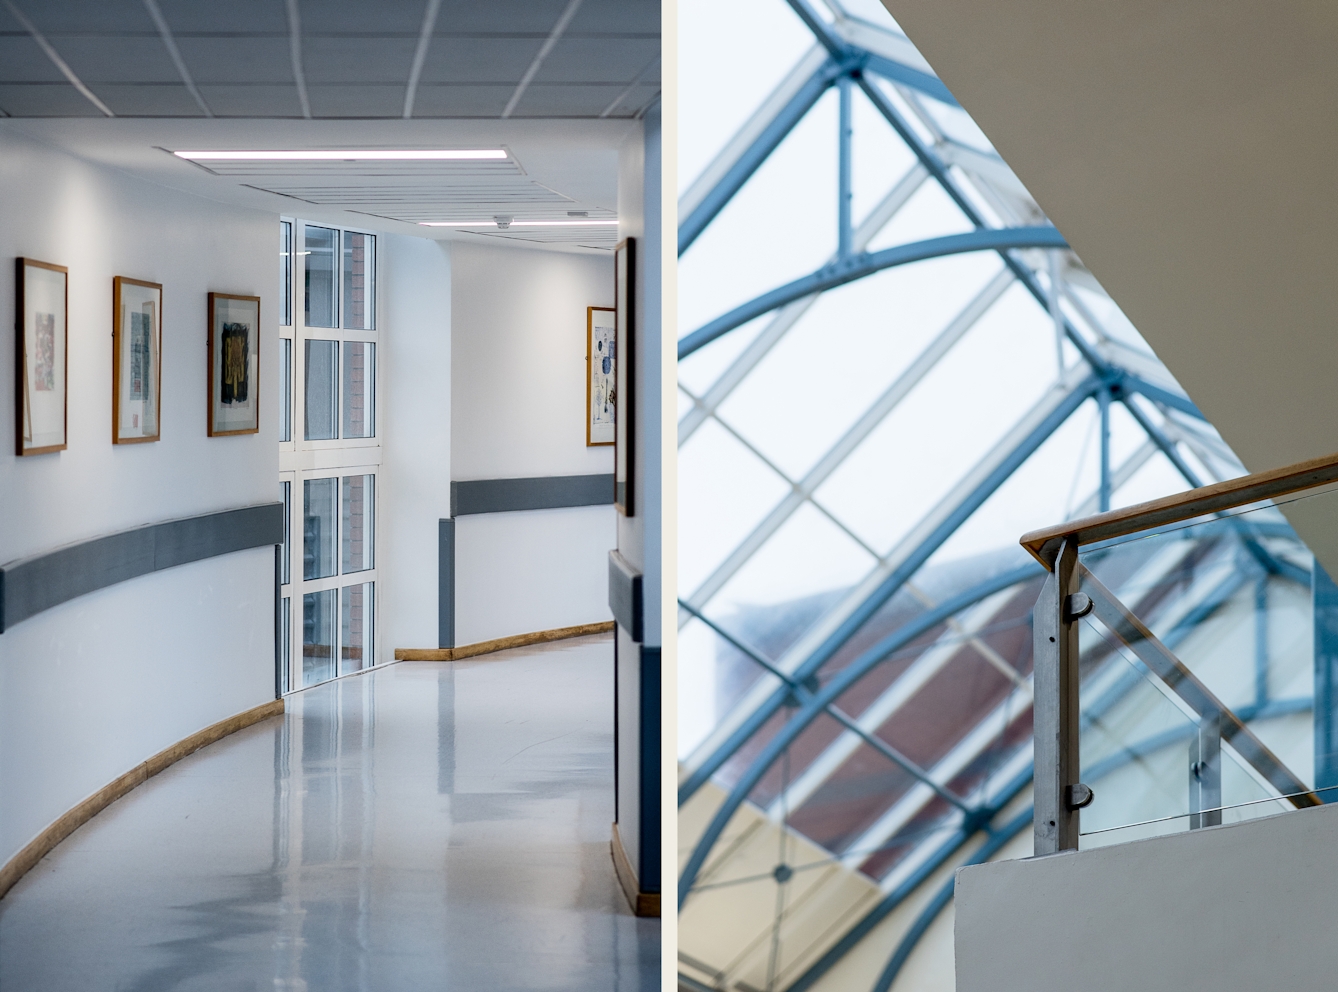 Photographic diptych showing two hospital interiors. The image on the left shows a corridor curving to the right out of view, with four framed pictures on the wall. The image on the right shows a view into the glass entrance atrium with part of a balcony from an upper level in view.